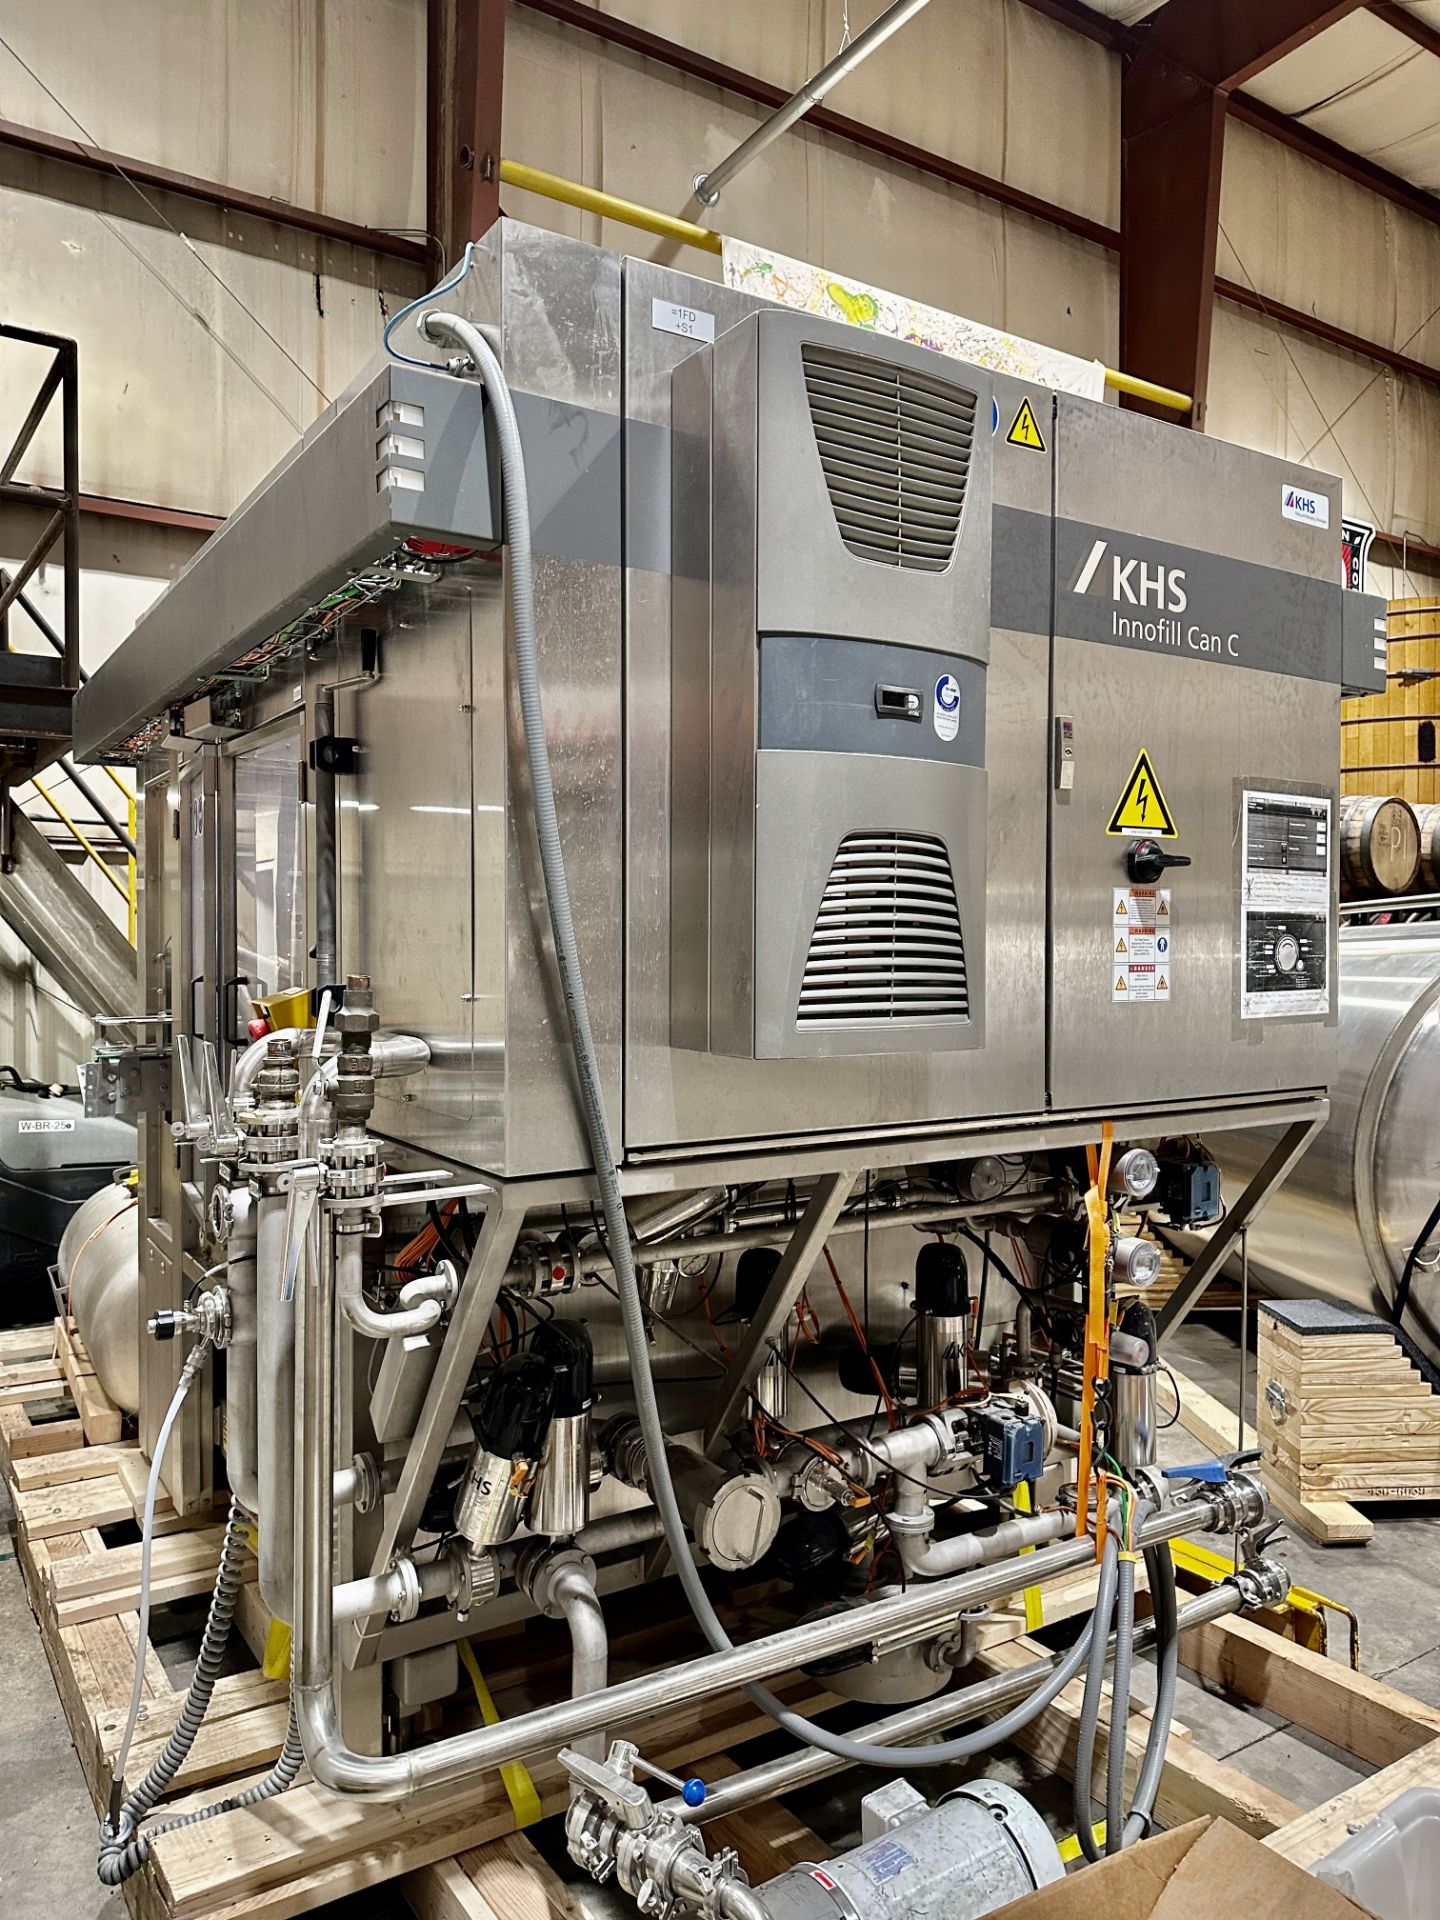 2019 KHS Innofill Can C Micro 18-Head Can Filler &amp; 4-Head Seamer, S/N: 10343324 - Image 5 of 21